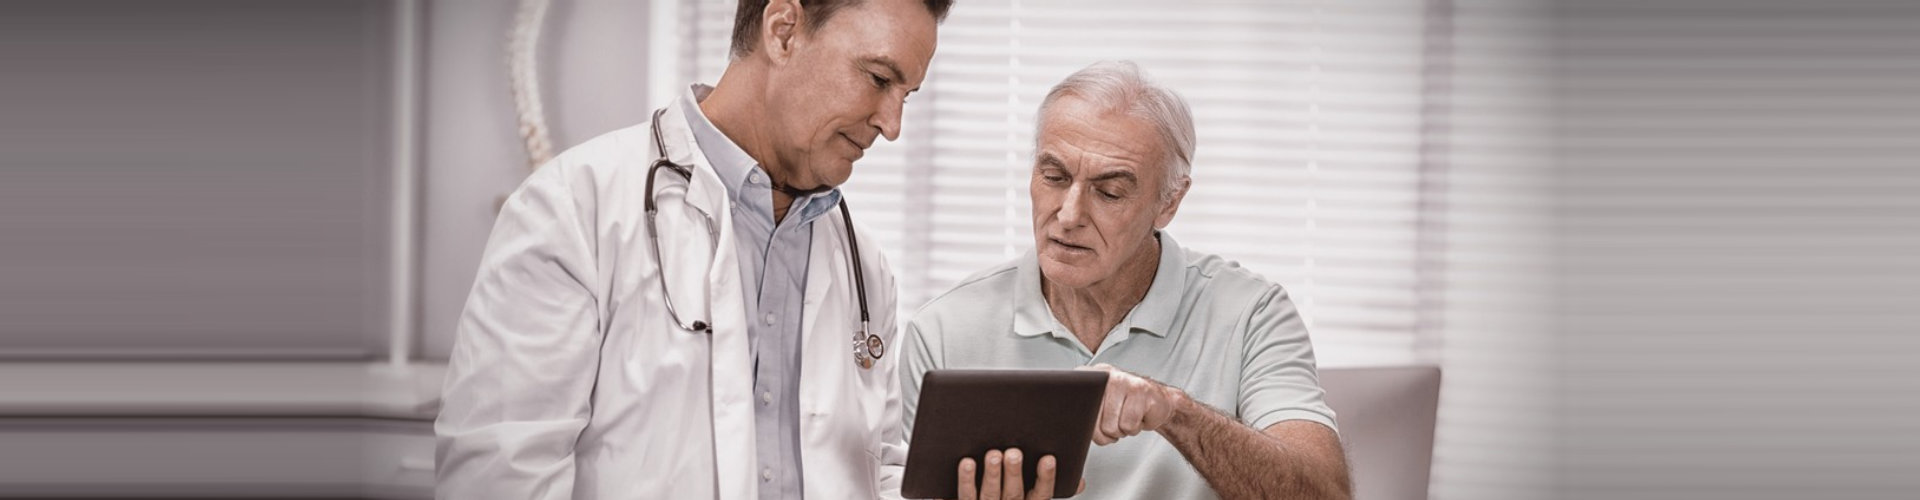 doctor showing the results to elderly